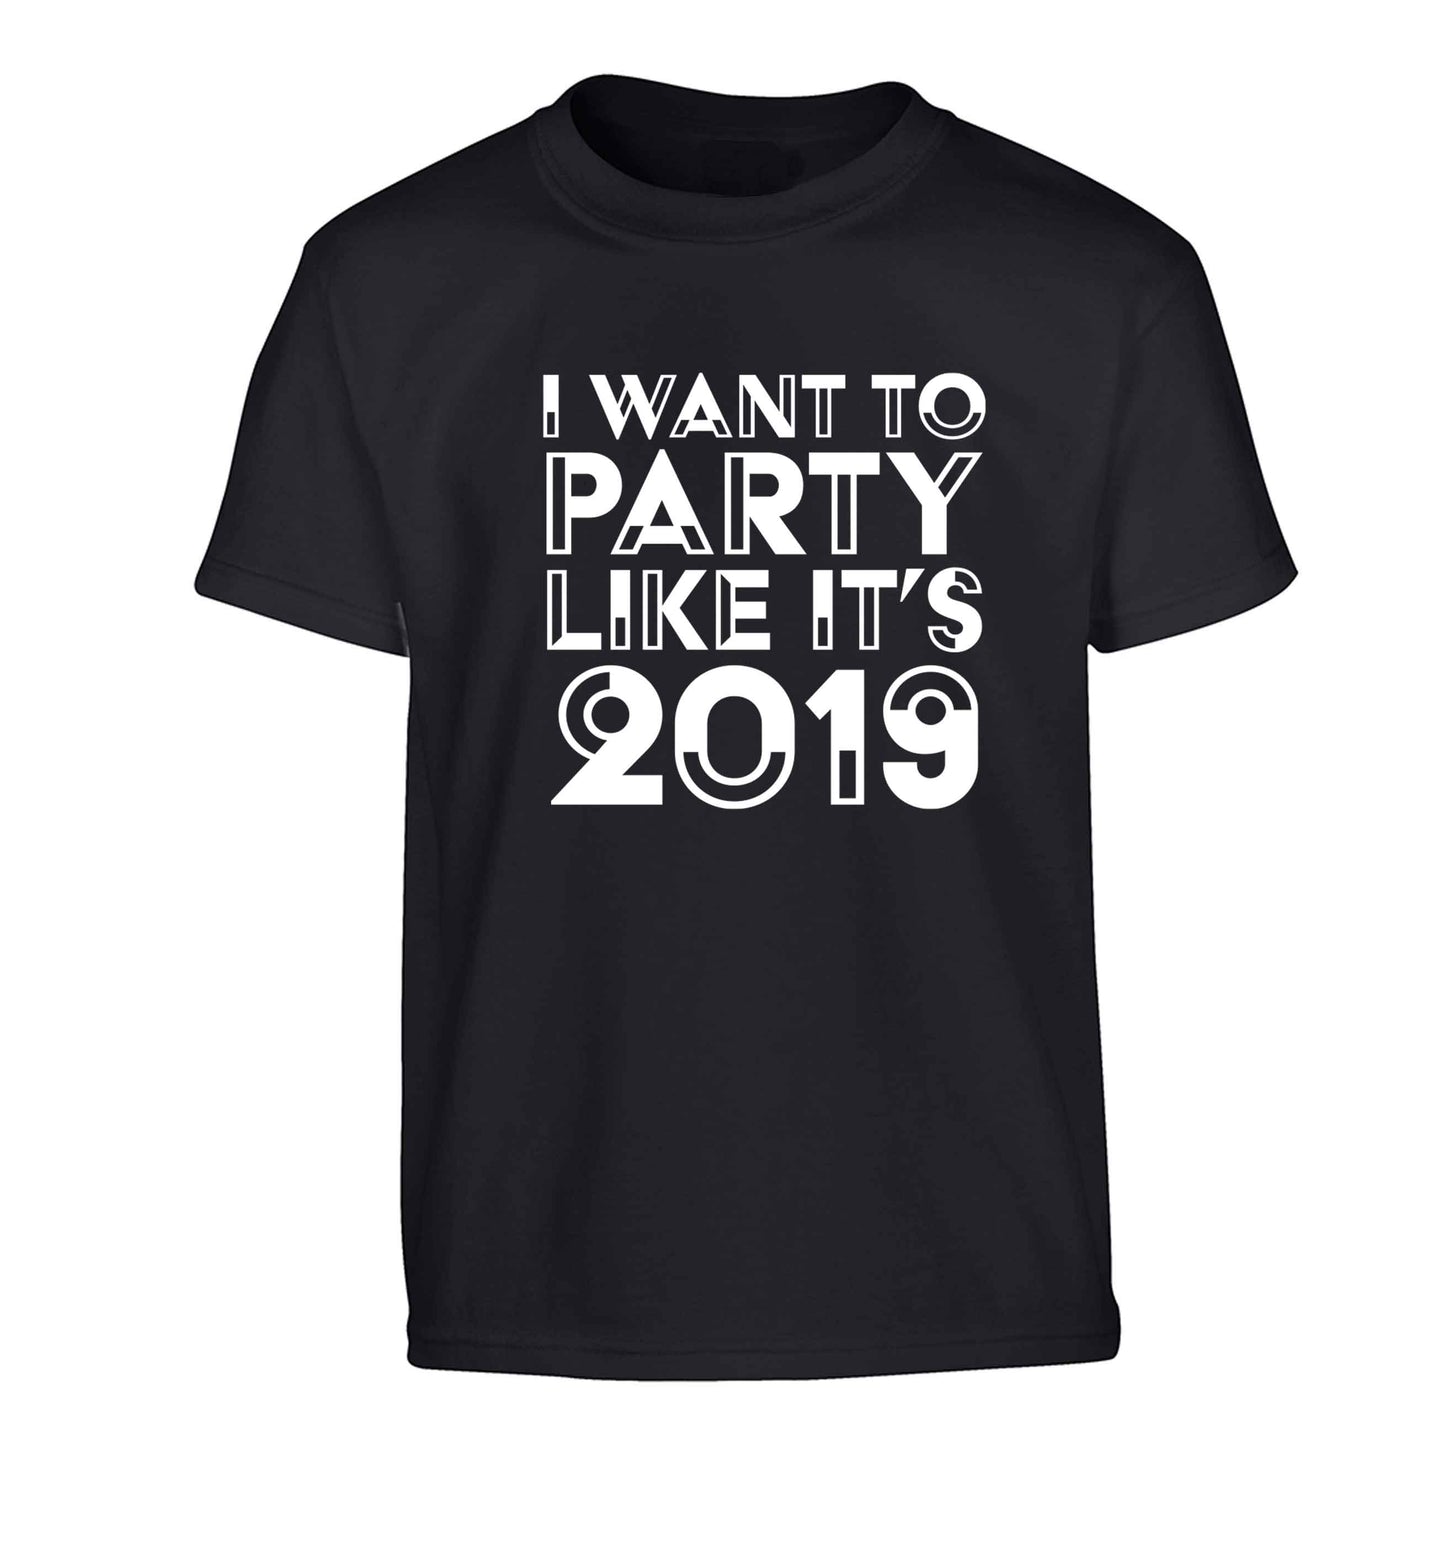 I want to party like it's 2019 Children's black Tshirt 12-13 Years